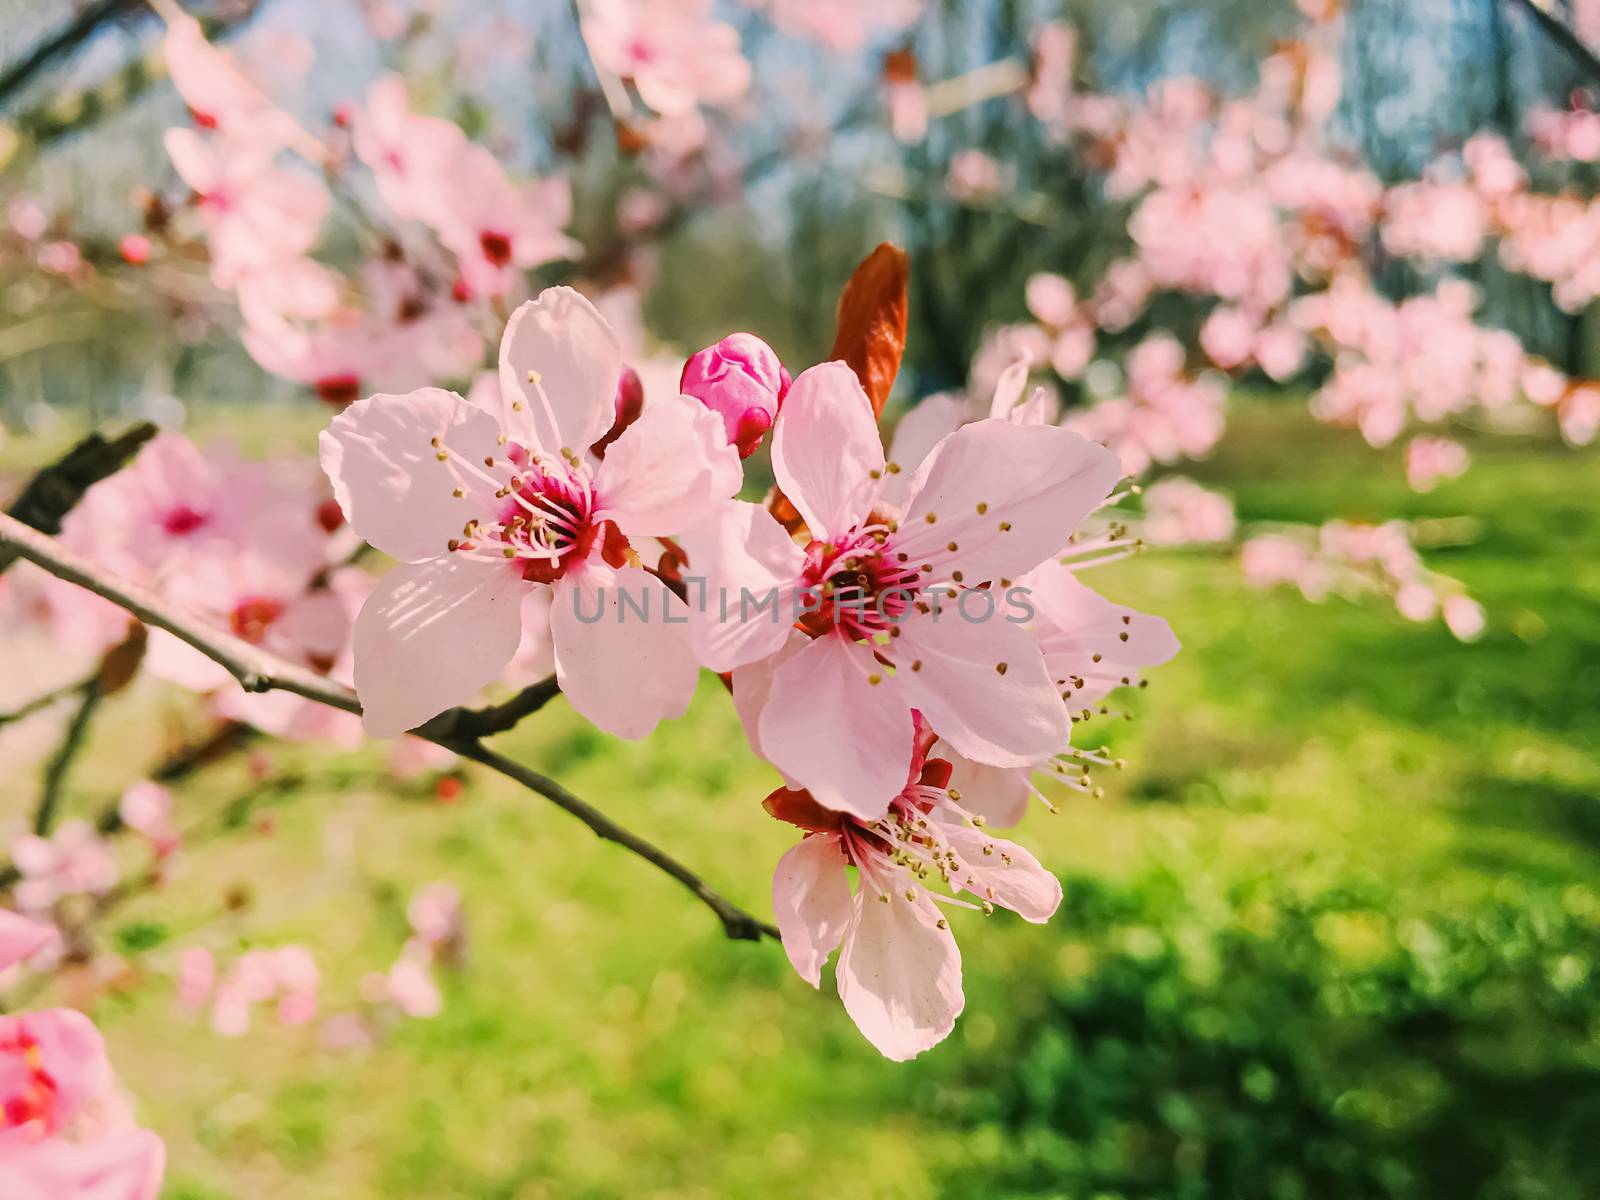 Apple tree flowers bloom, floral blossom in sunny spring